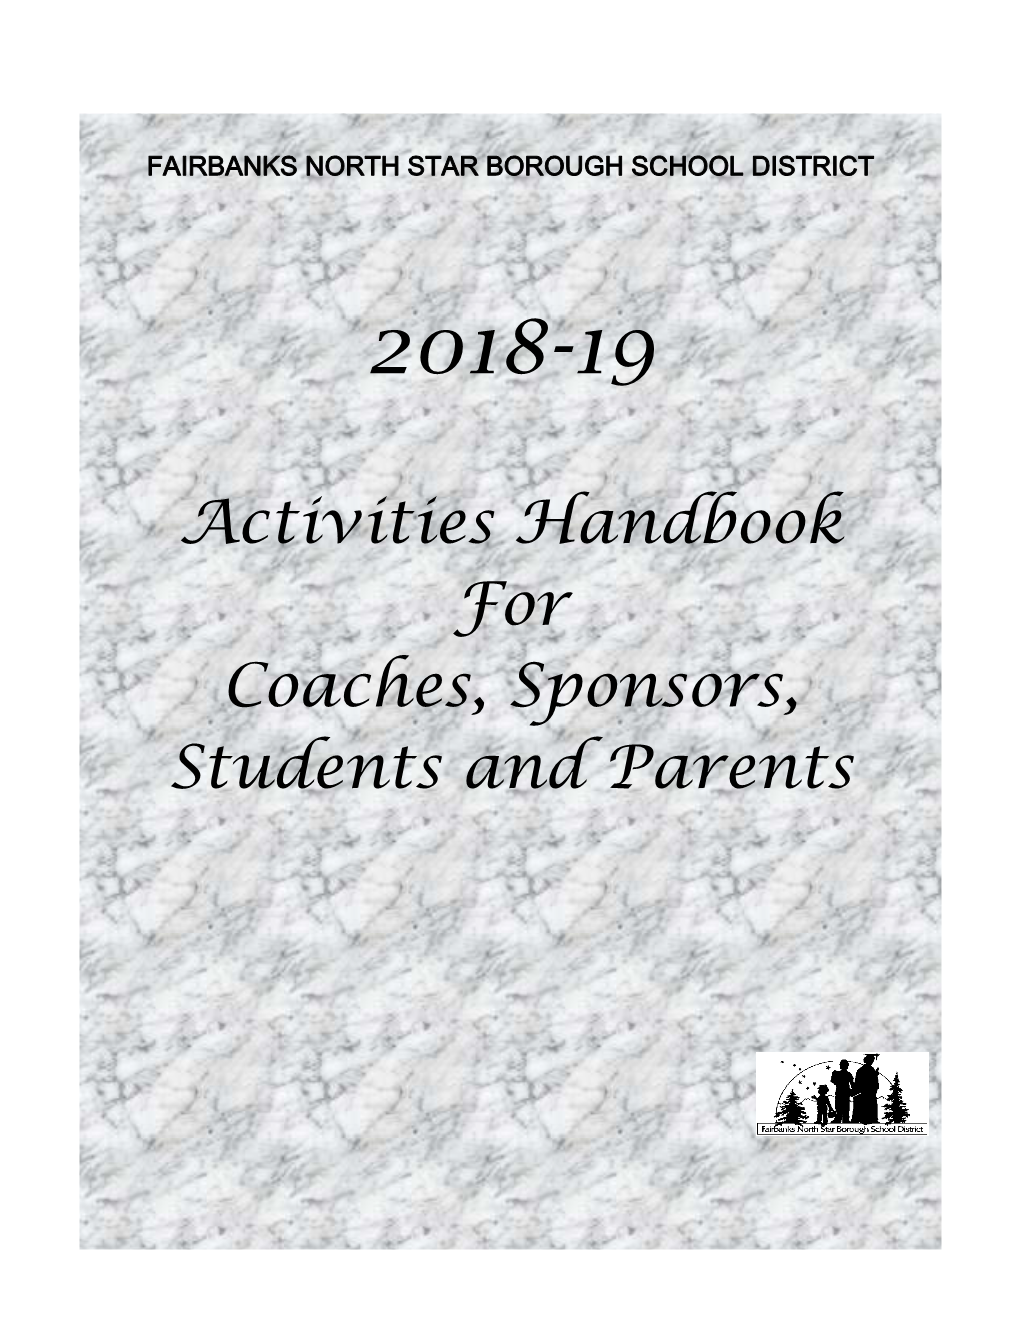 Activities Handbook for Coaches, Sponsors, Students and Parents